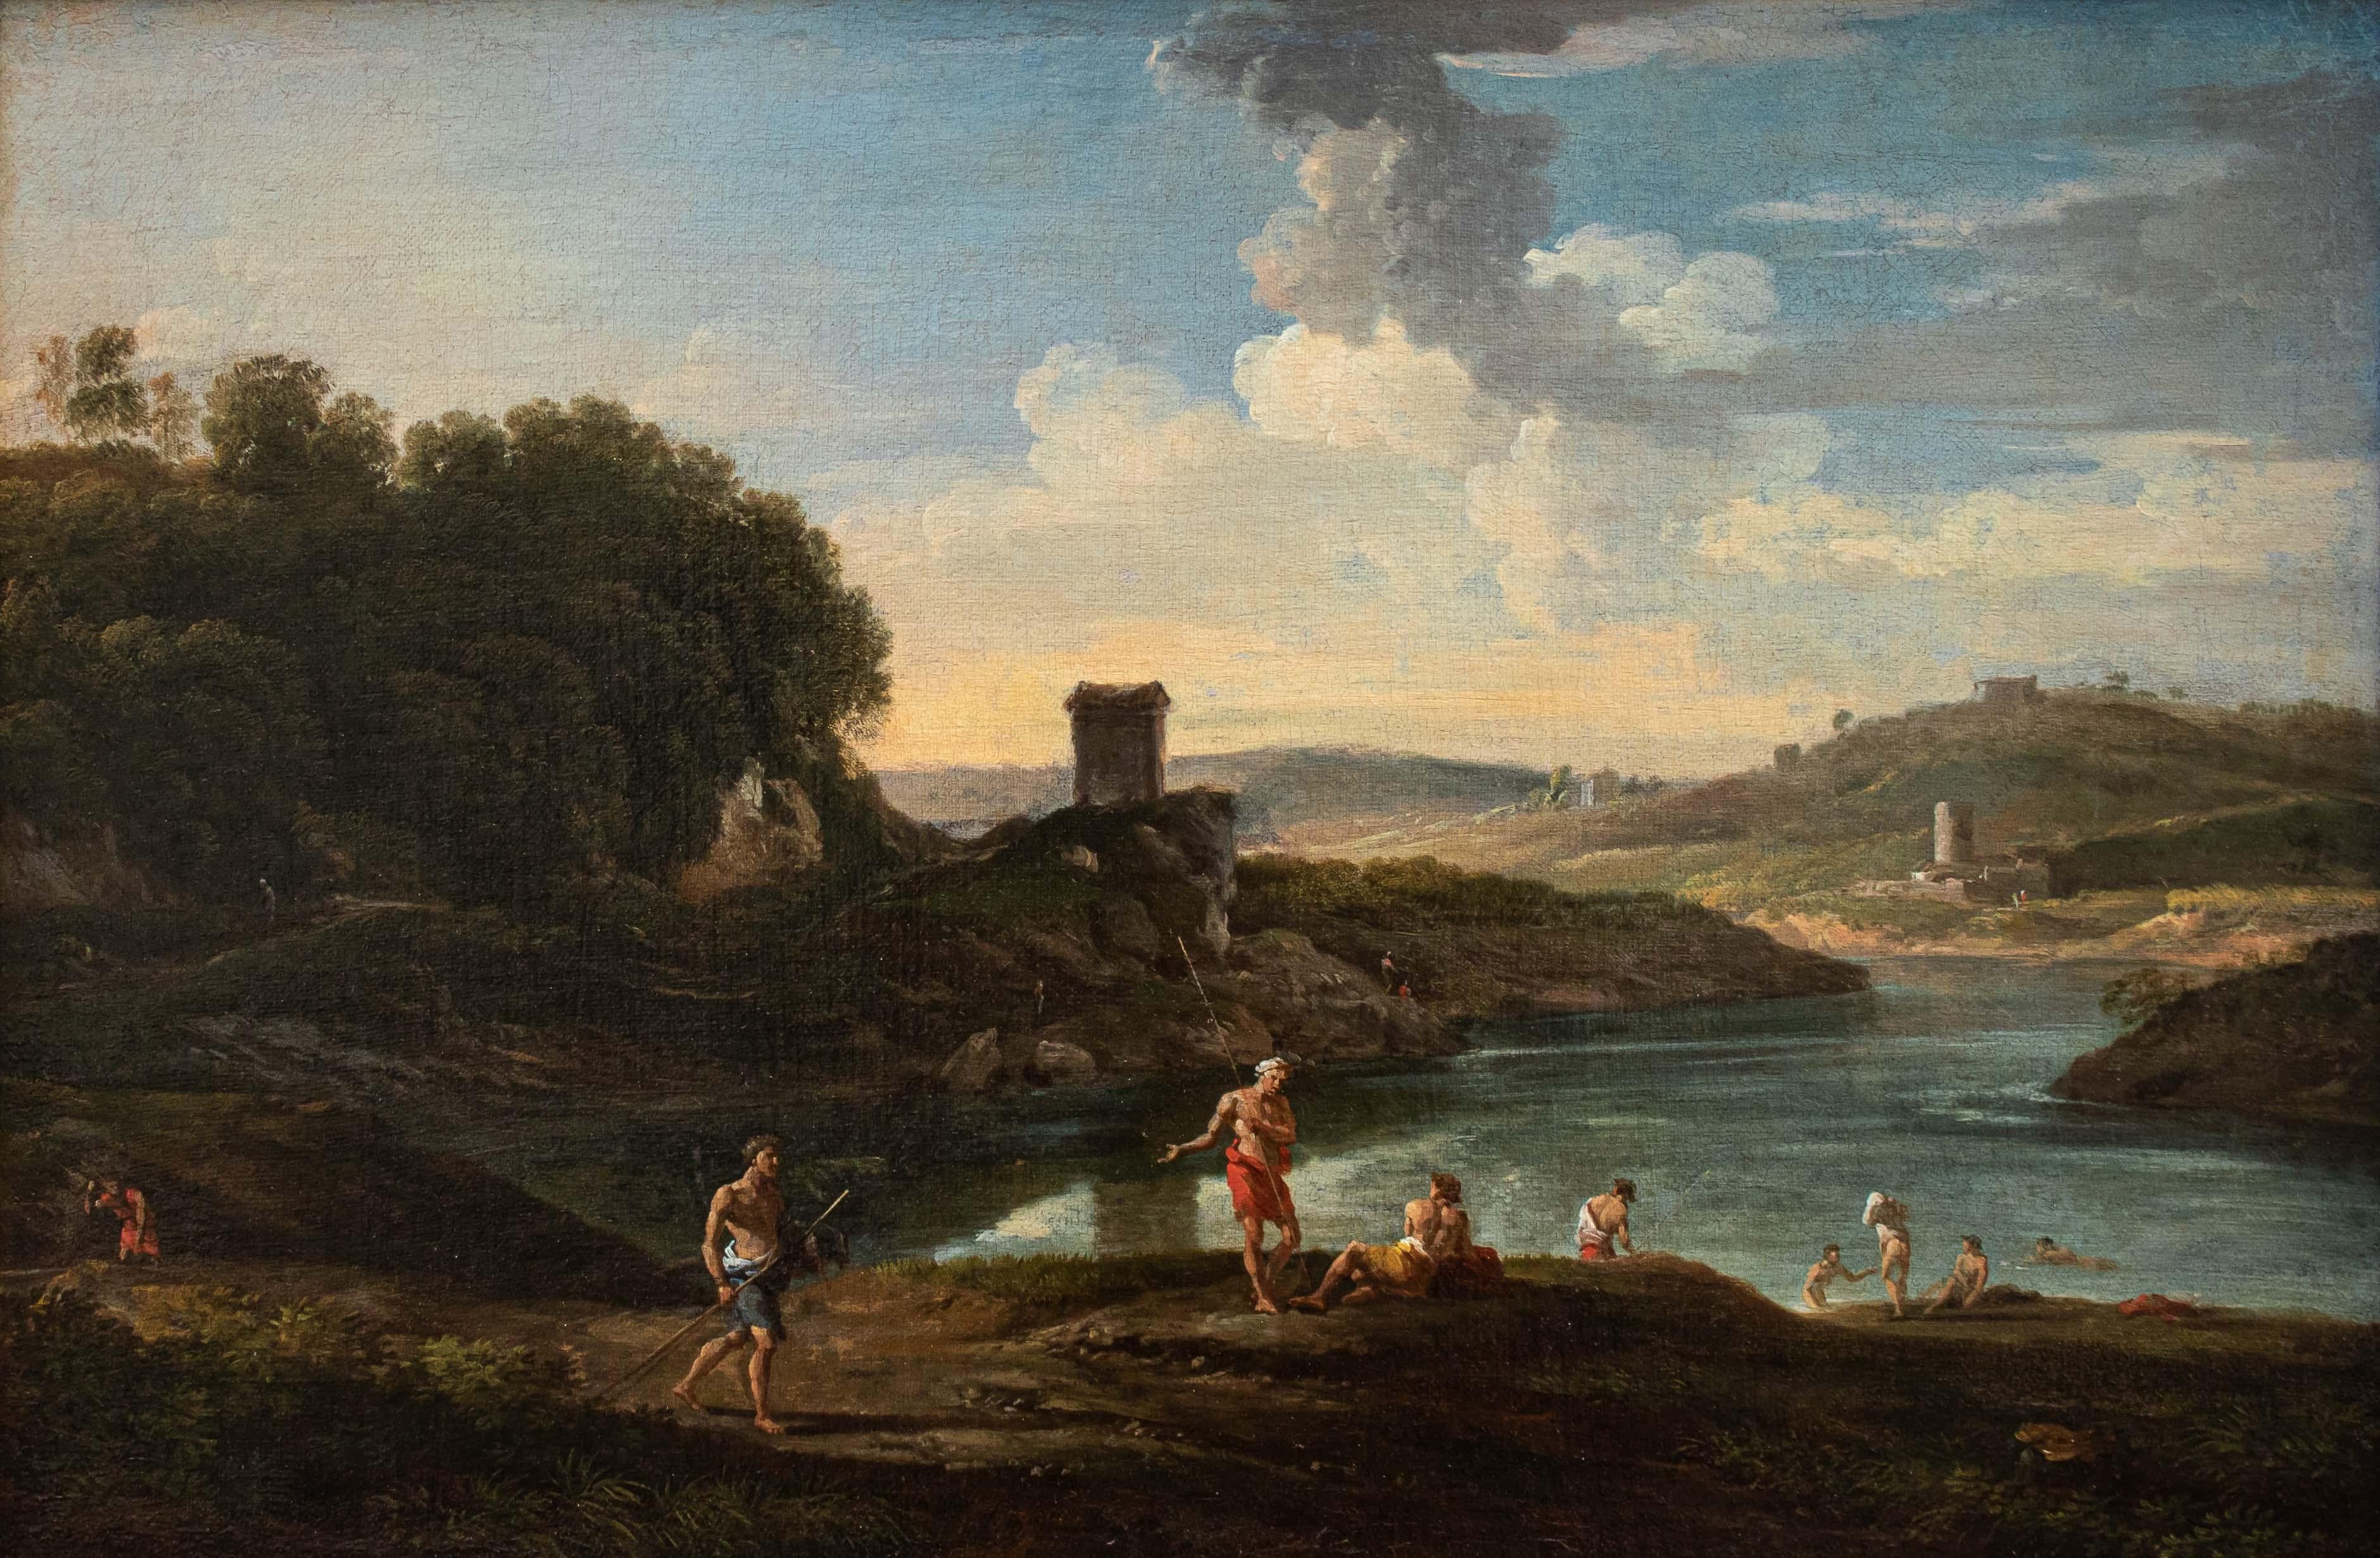 George Lambert (1700 - 1765)

Bucolic landscape with characters

Measures: Oil on canvas, 50 x 74 cm

Frame 59 x 84 cm

George Lambert with Richard Wilson is recognized as one of the greatest interpreters of English landscape painting.